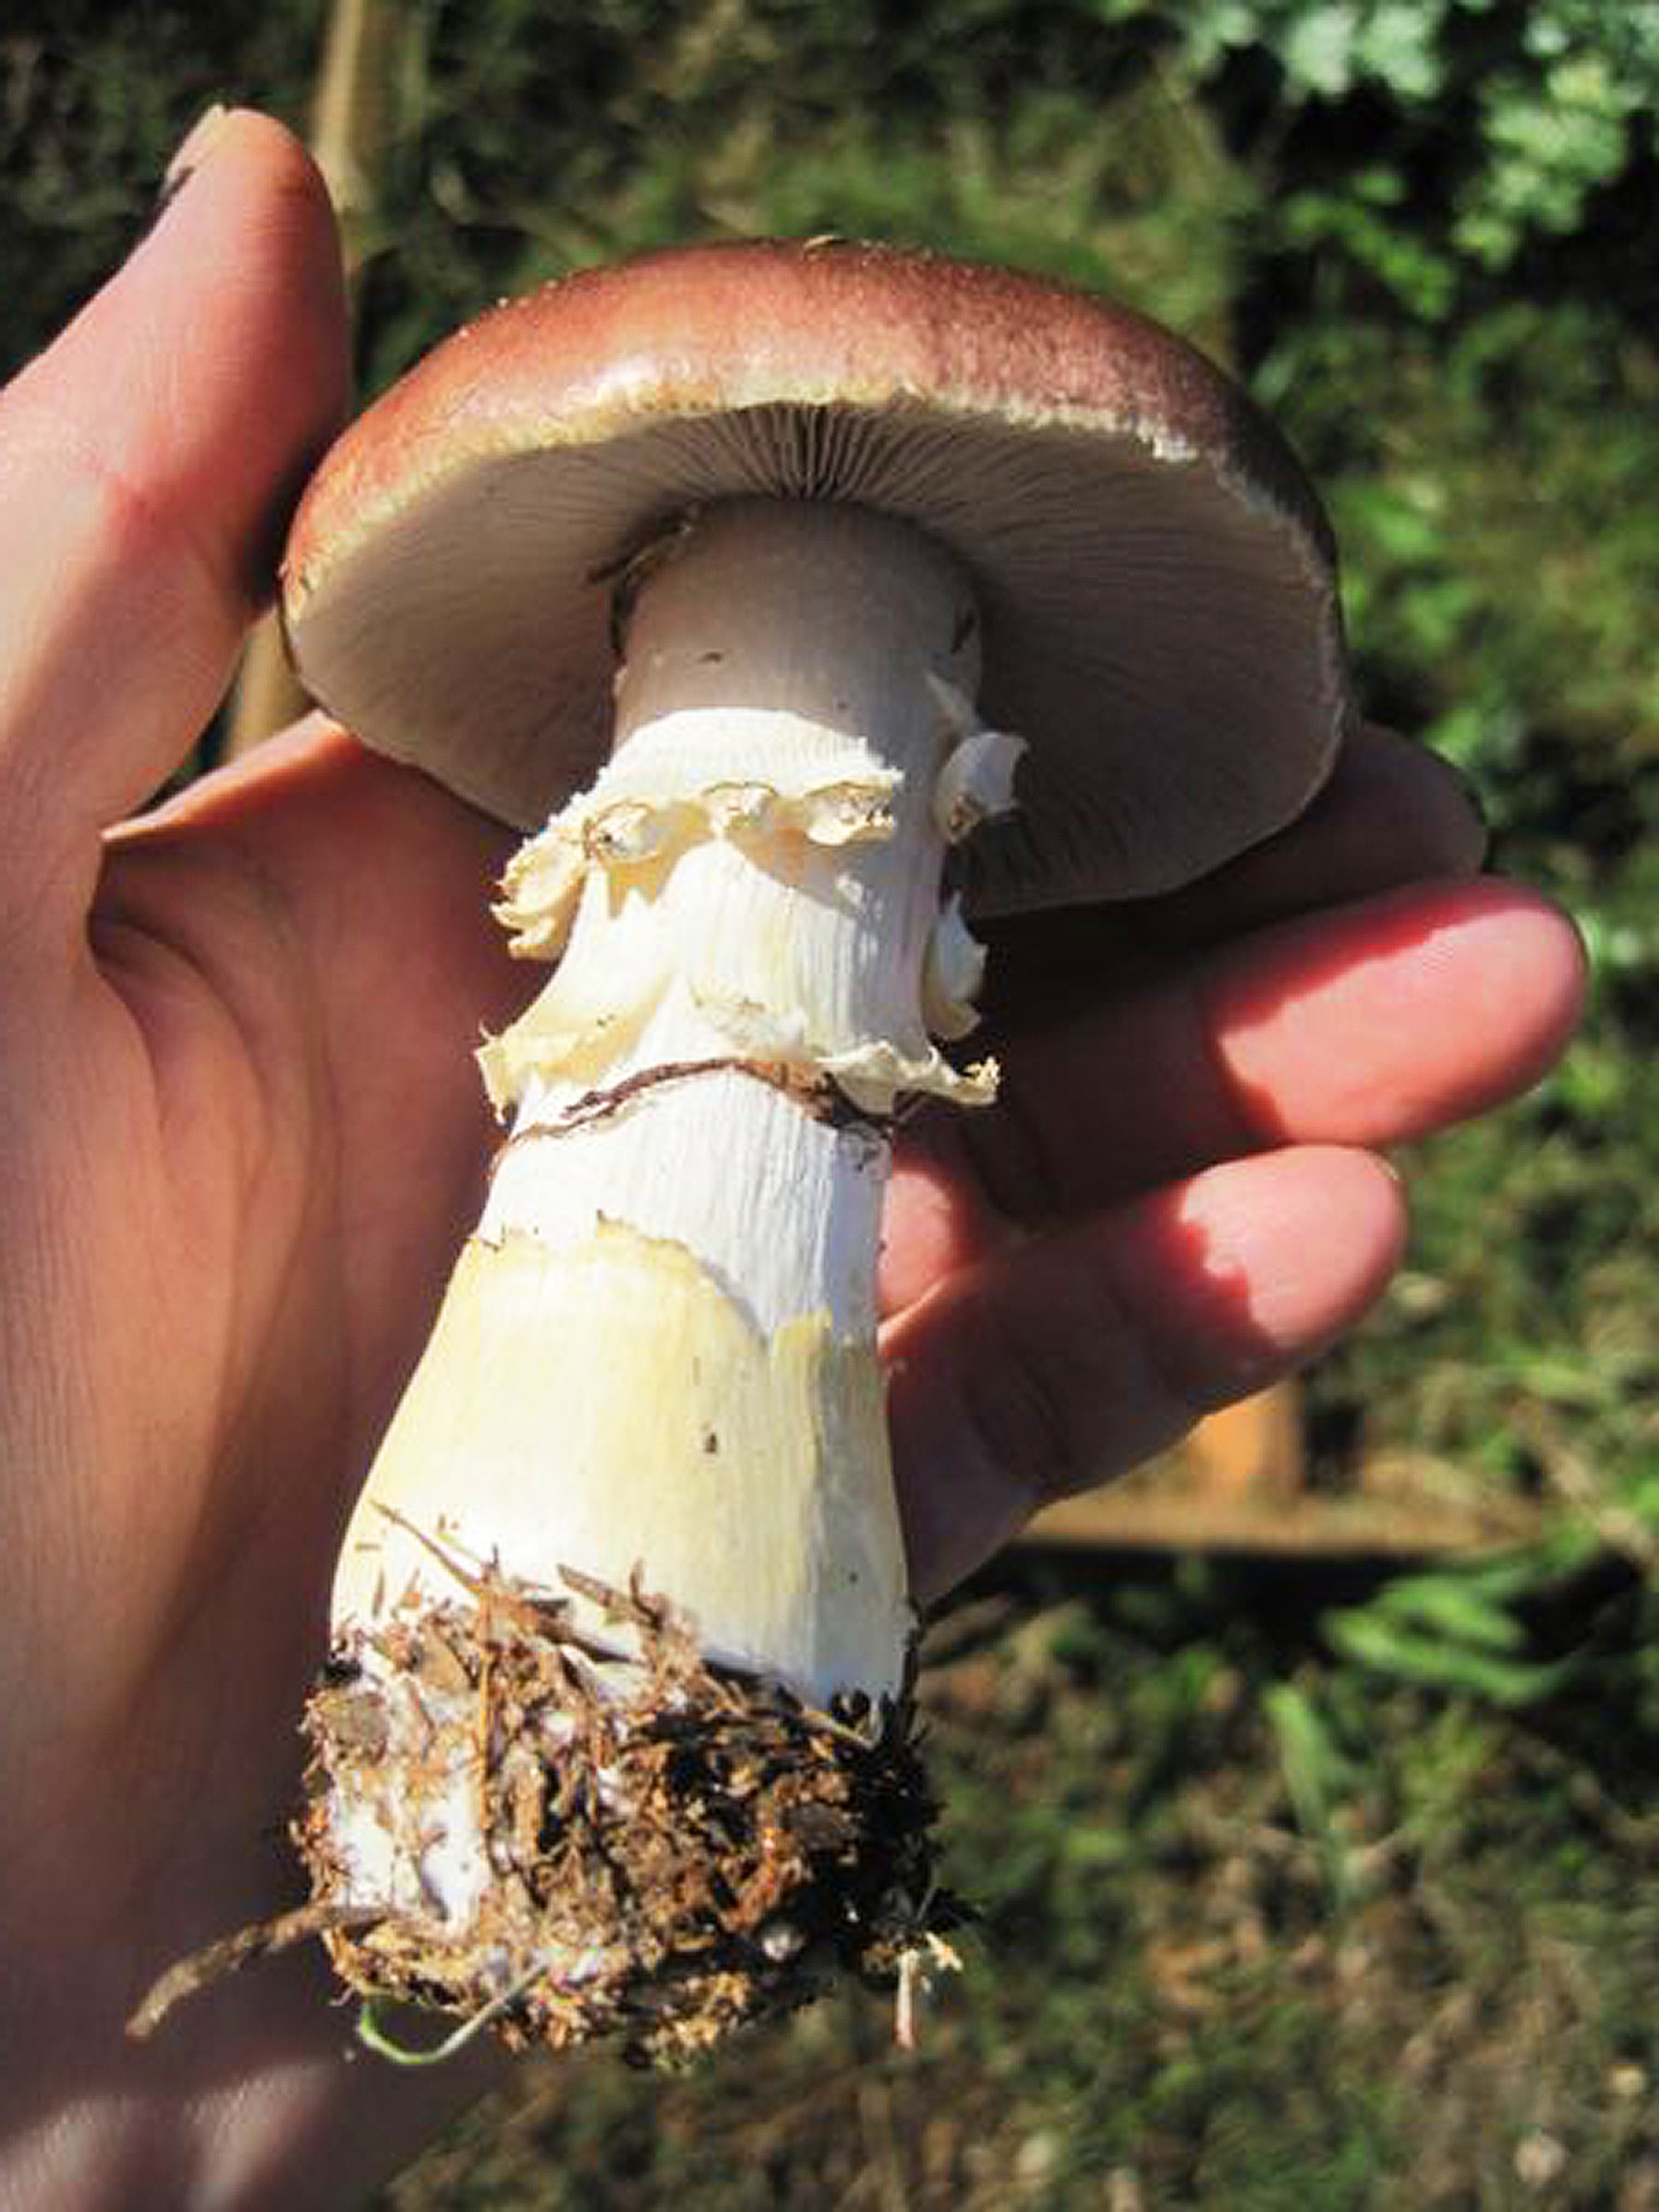 Growing healthy mushrooms like these is possible when the proper protocol is practiced.